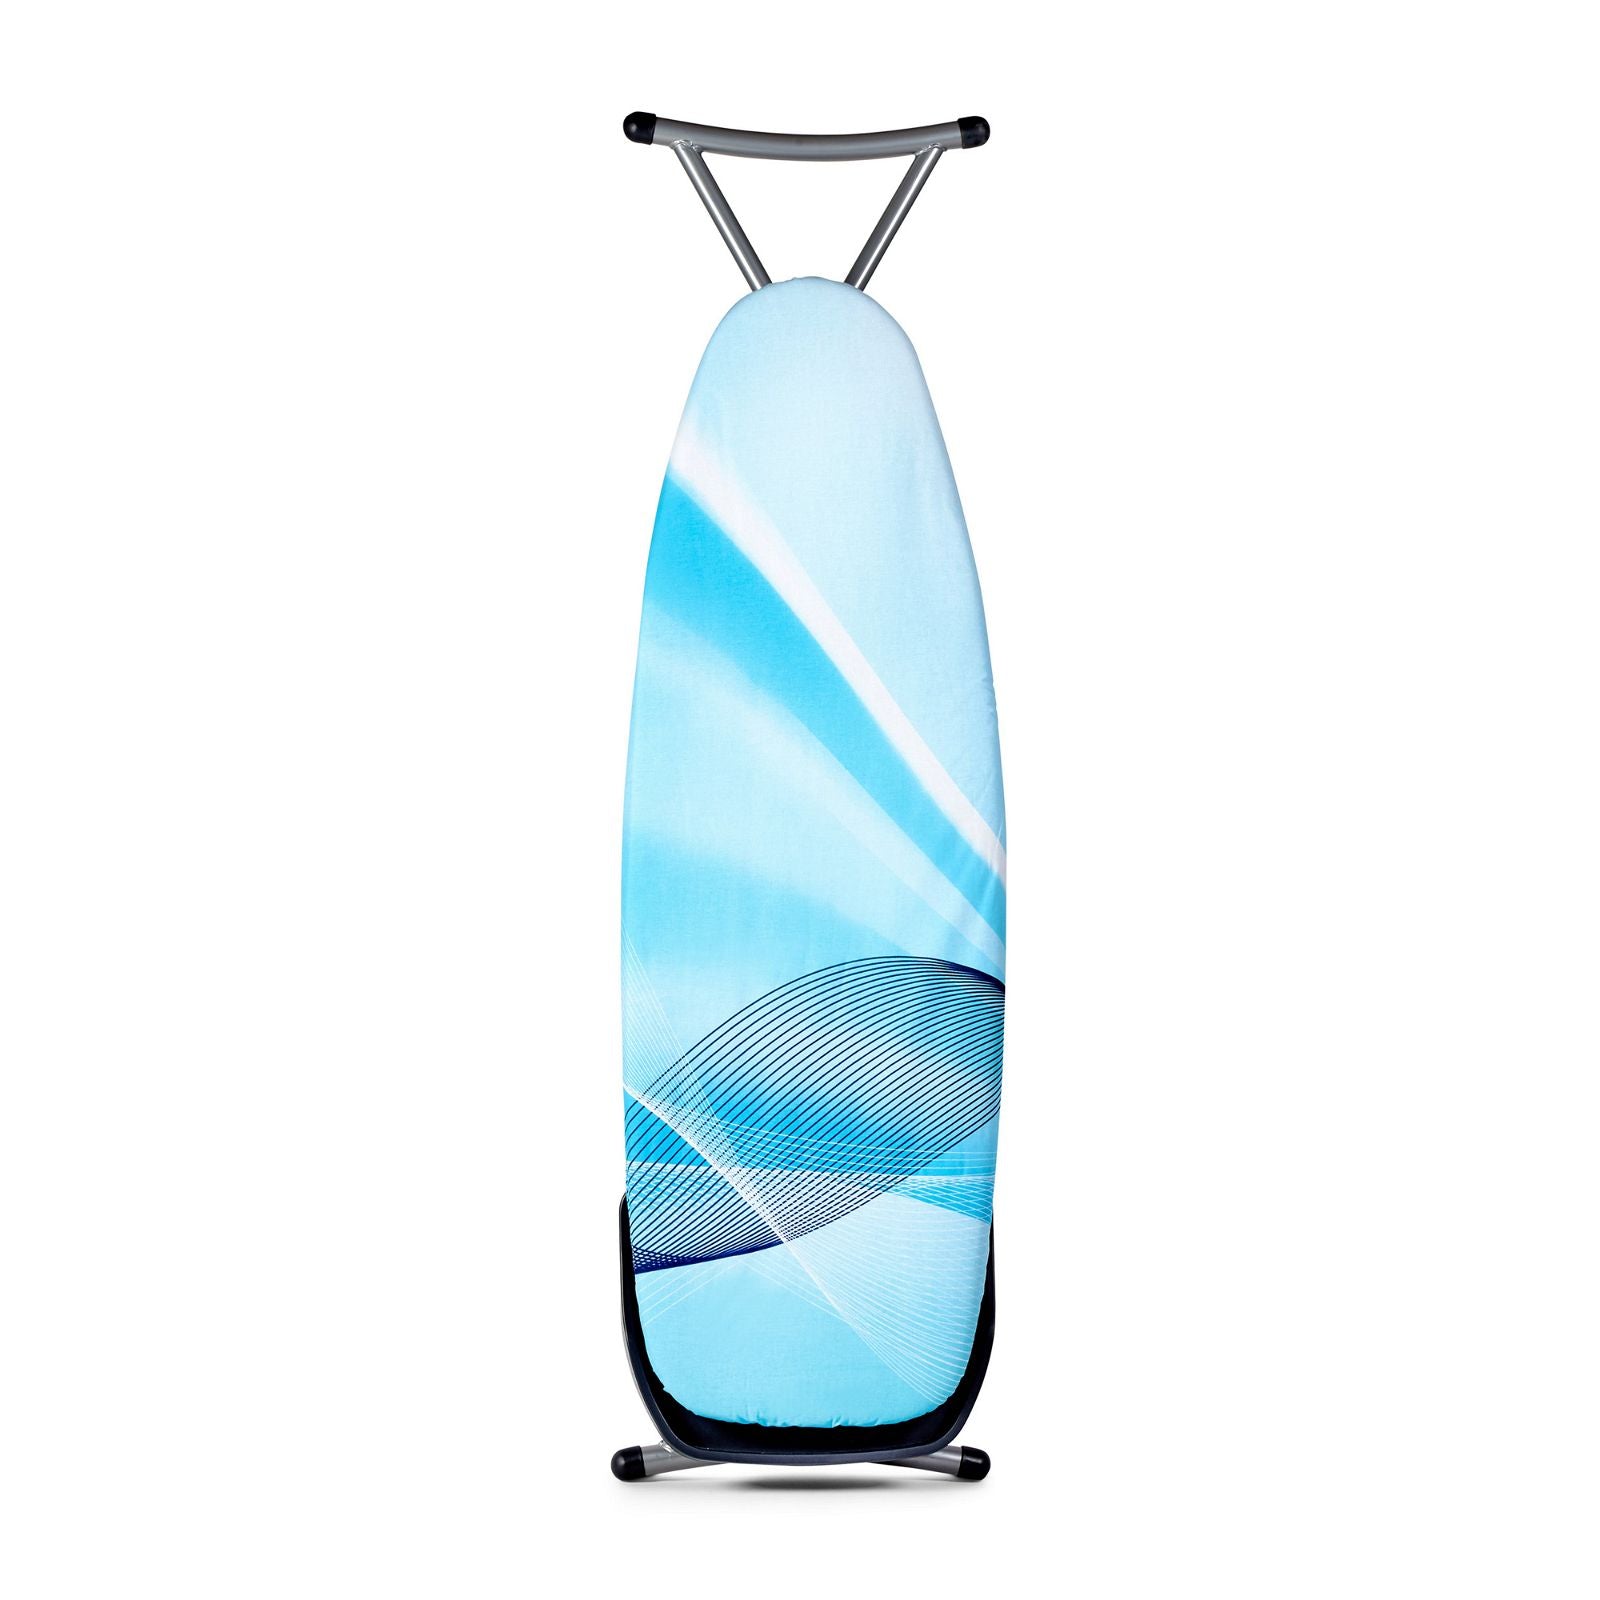 Westinghouse Ironing Board 1200mm Lightweight-#product_category#- Distributed by:  under license